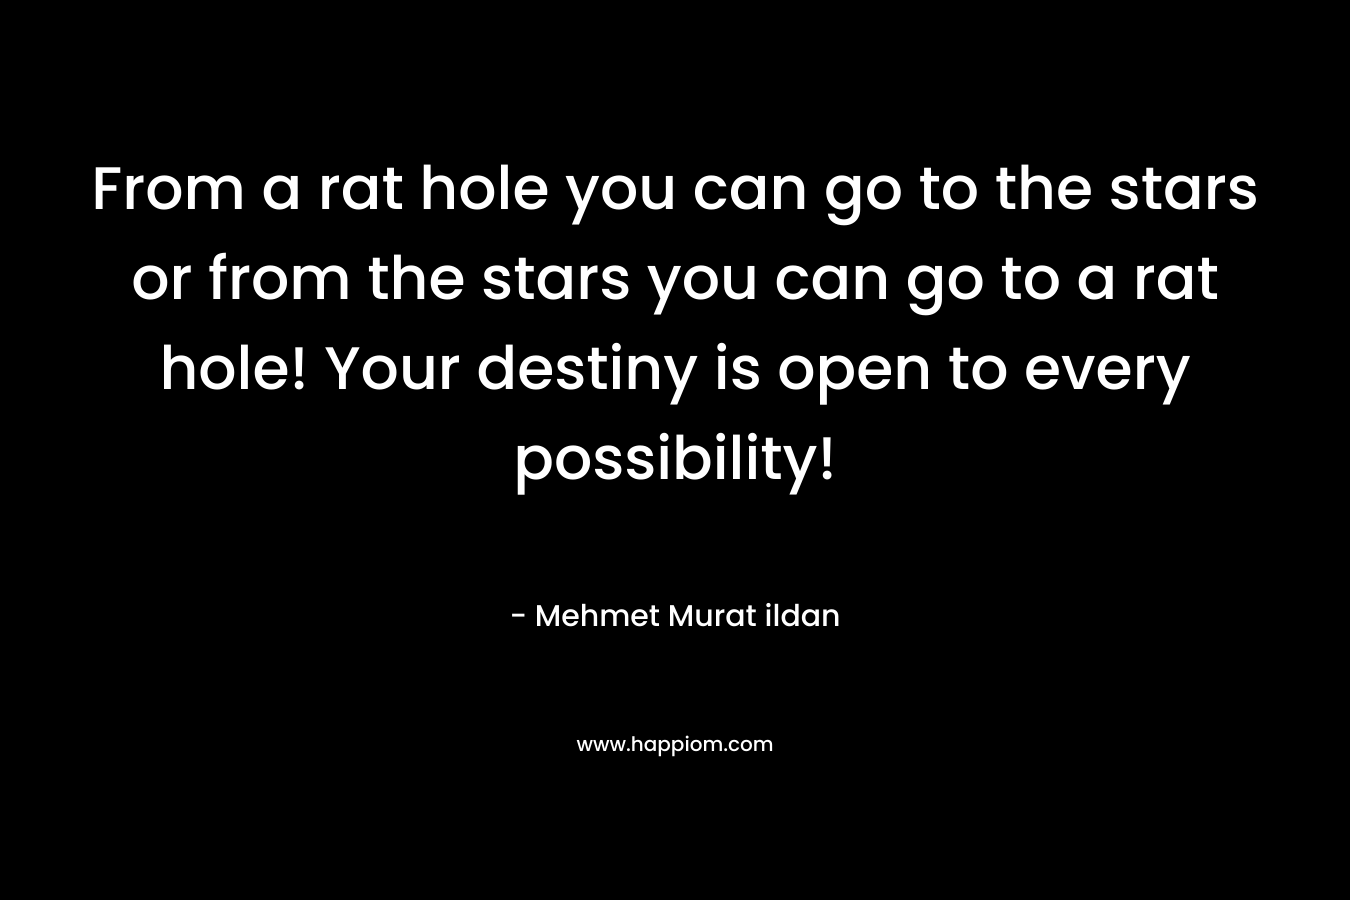 From a rat hole you can go to the stars or from the stars you can go to a rat hole! Your destiny is open to every possibility!